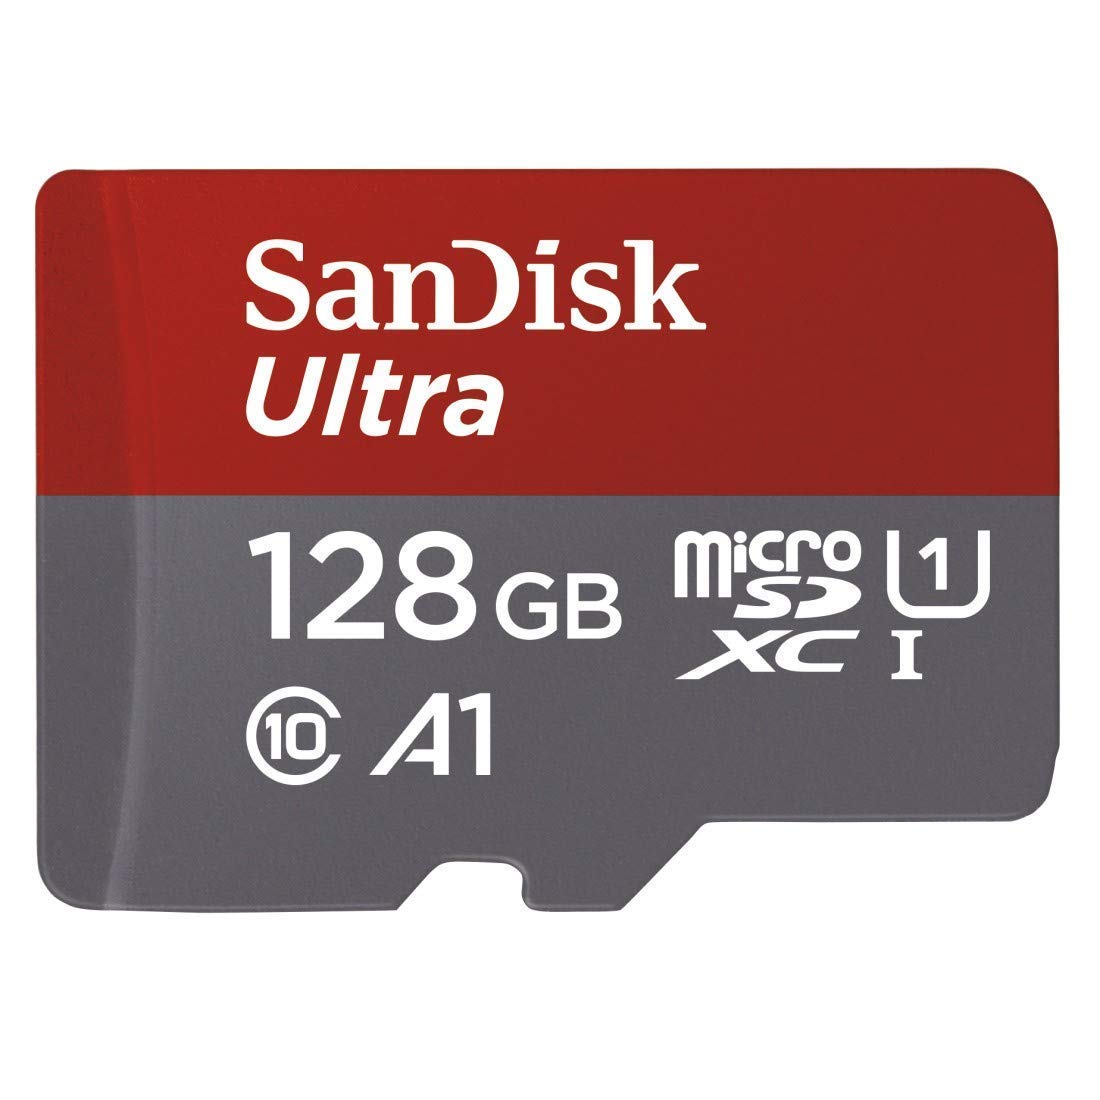 SanDisk Ultra 128GB UHS-I/Class 10 Micro SDXC Memory Card Up To 80MB/s With Adapter- SDSQUNC-128G